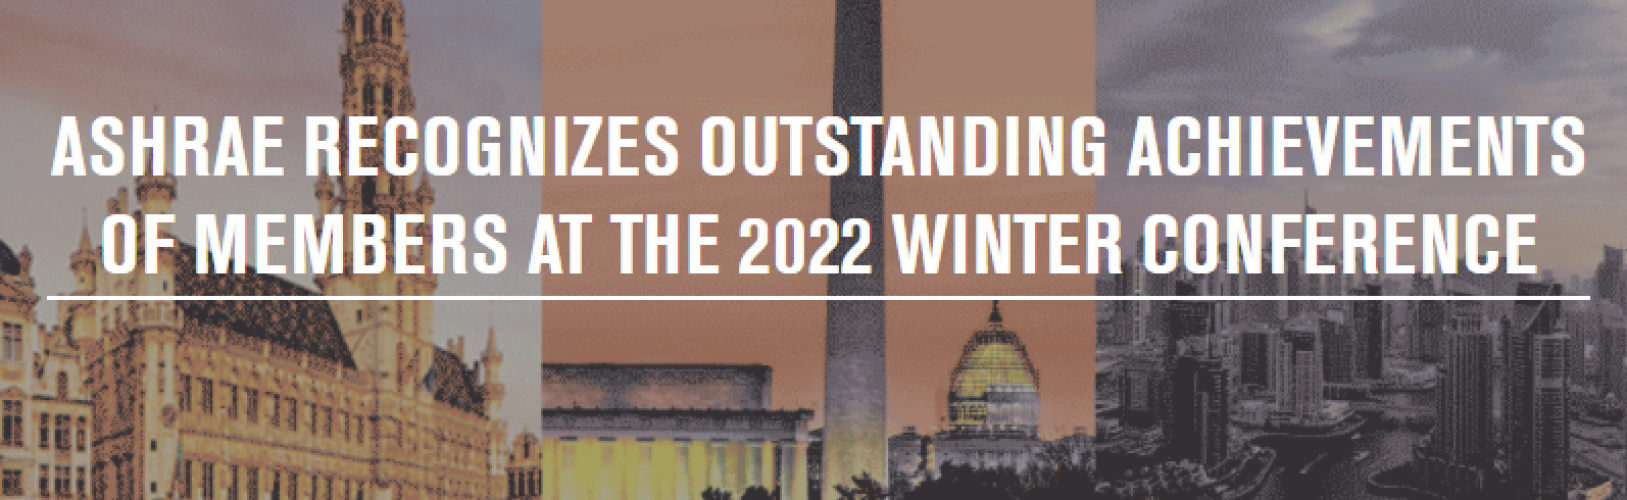 ASHRAE Recognizes Outstanding Achievements of Members at the 2022 Winter Conference